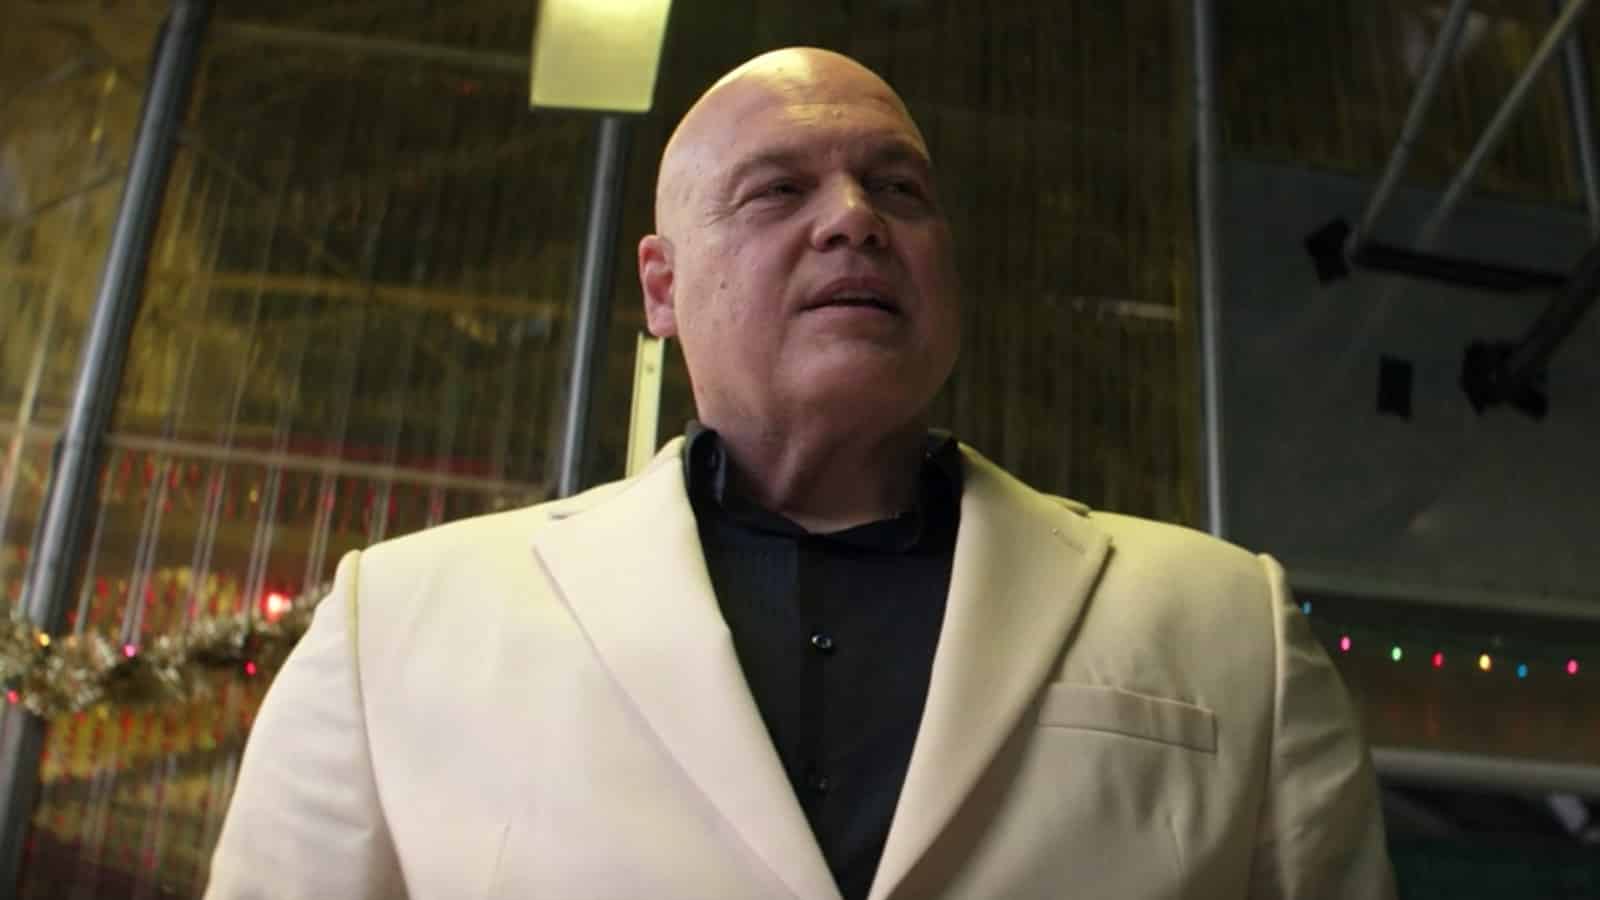 Marvel: Why The Big Show is (and isn't) the perfect Kingpin